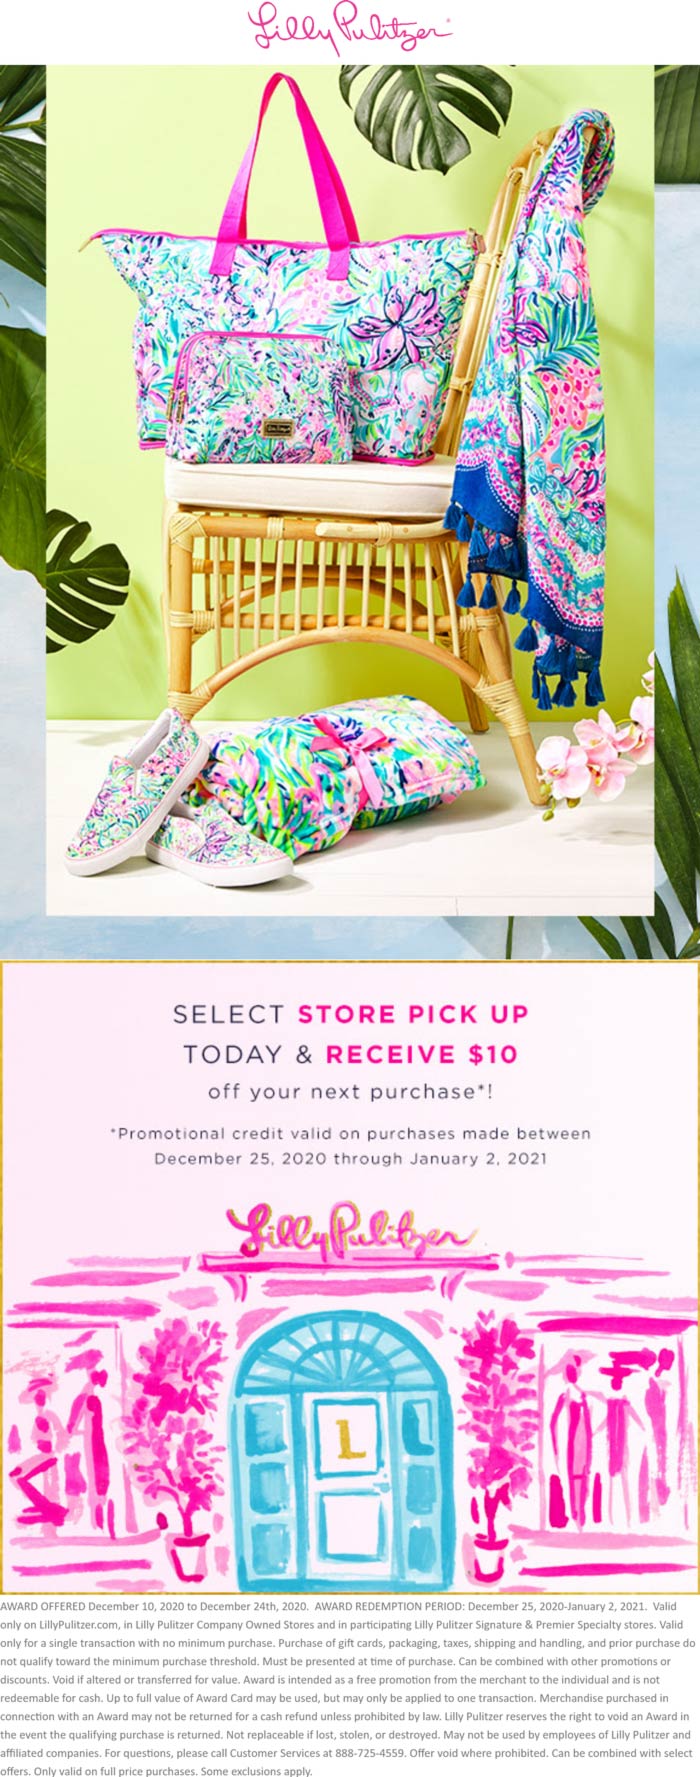 Lilly Pulitzer stores Coupon  $10 off followup with online & in-store pickup at Lilly Pulitzer #lillypulitzer 